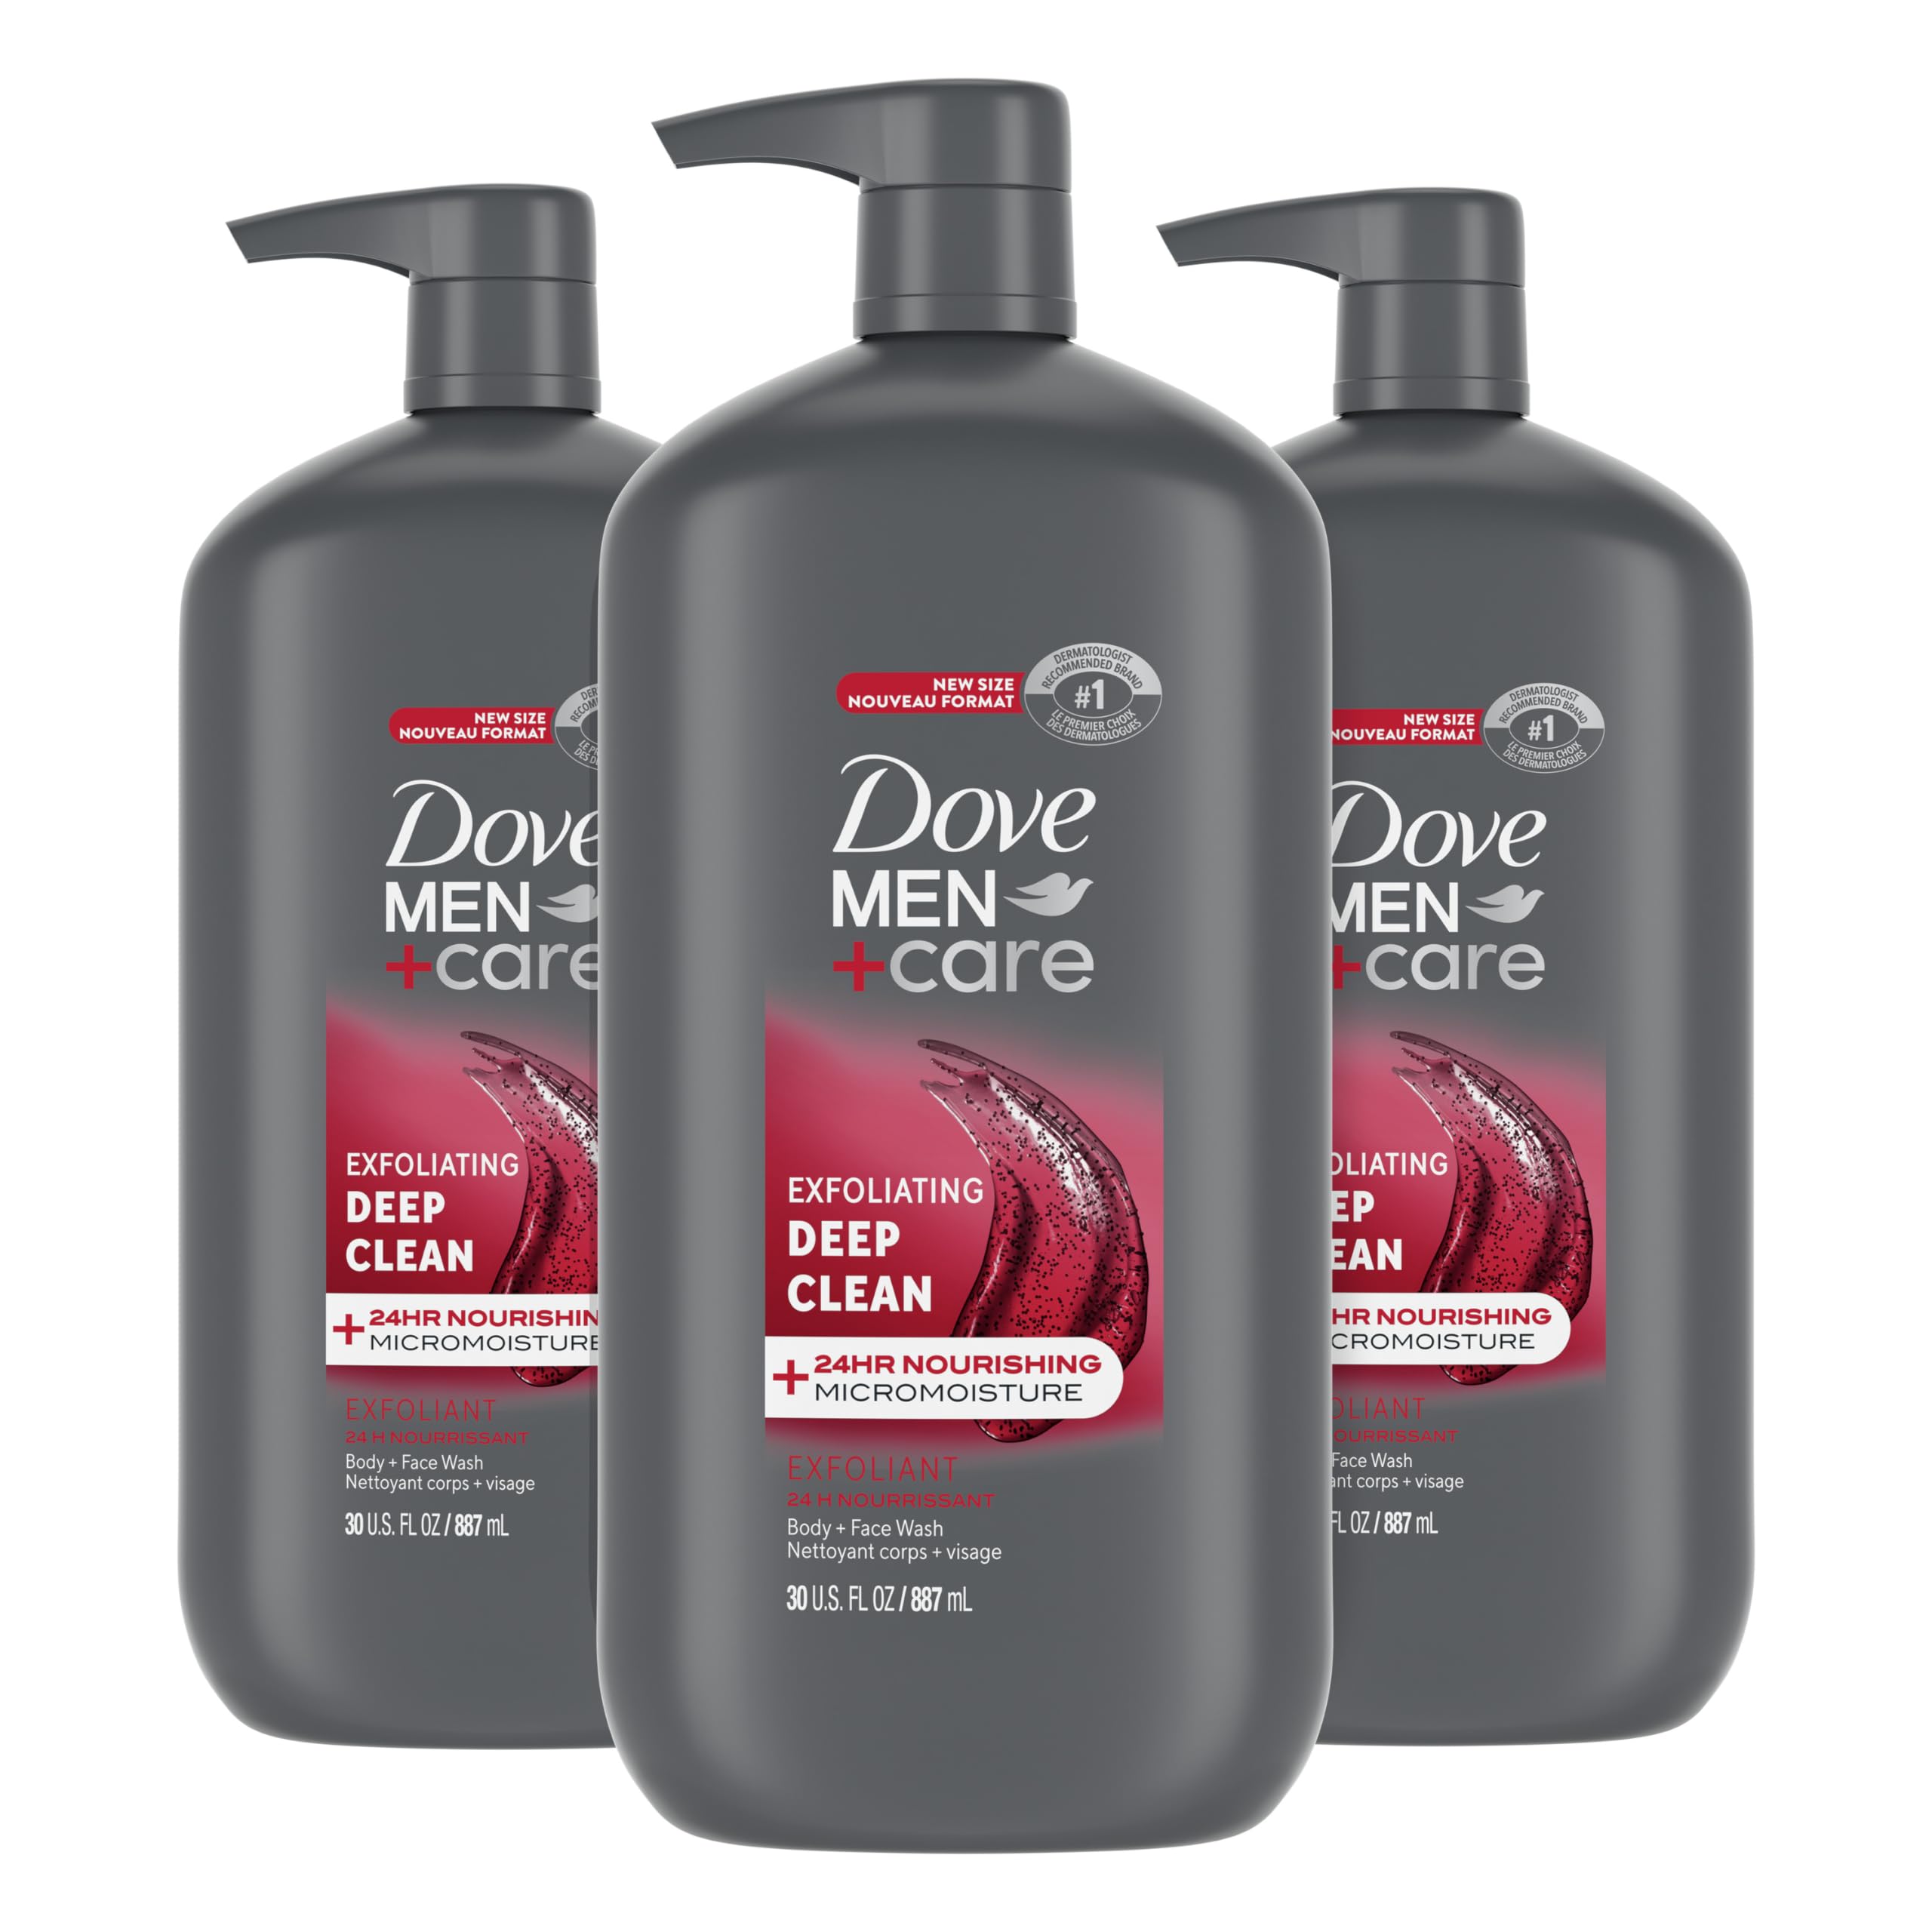 DOVE MEN + CARE Body and Face Wash Exfoliating Deep Clean 3 Count for Men, with 24-Hour Nourishing Micromoisture Technology Body Wash, 30 oz